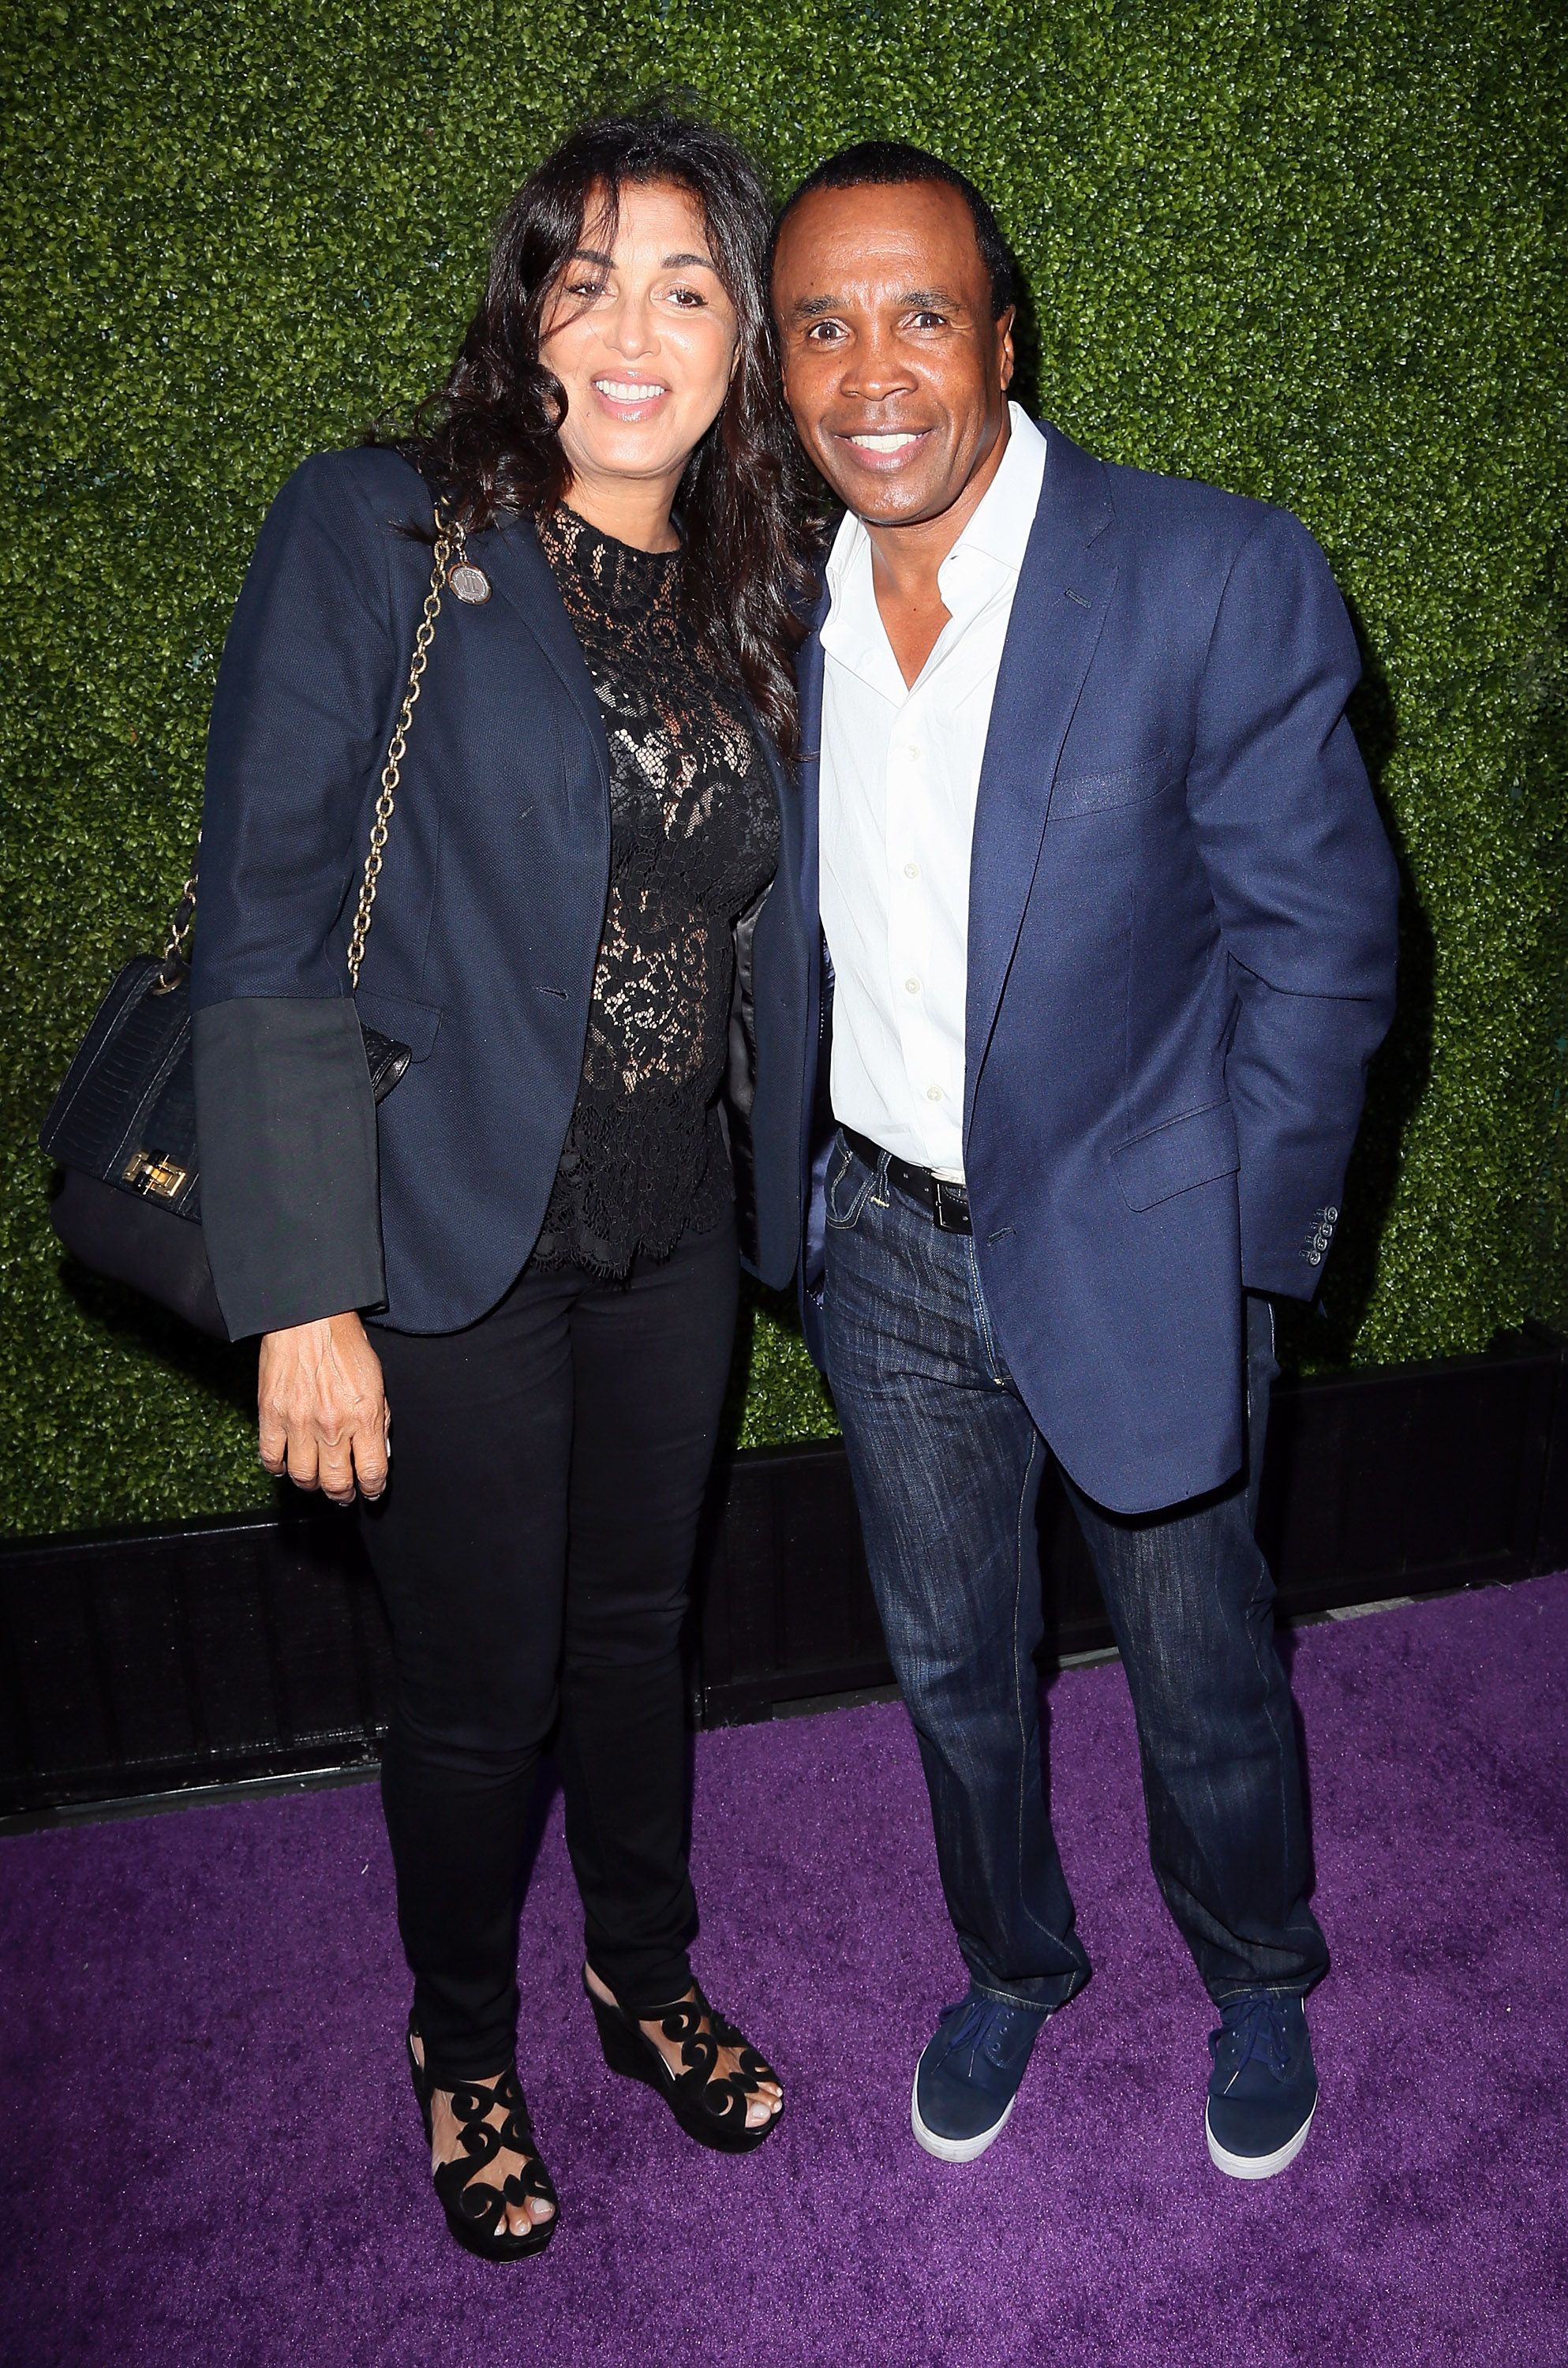 Sugar Ray Leonard and wife Bernadette Robi attend the HollyRod Foundation's 16th Annual DesignCare at The Lot Studios on July 19, 2014 in Los Angeles, California. | Source: Getty Images